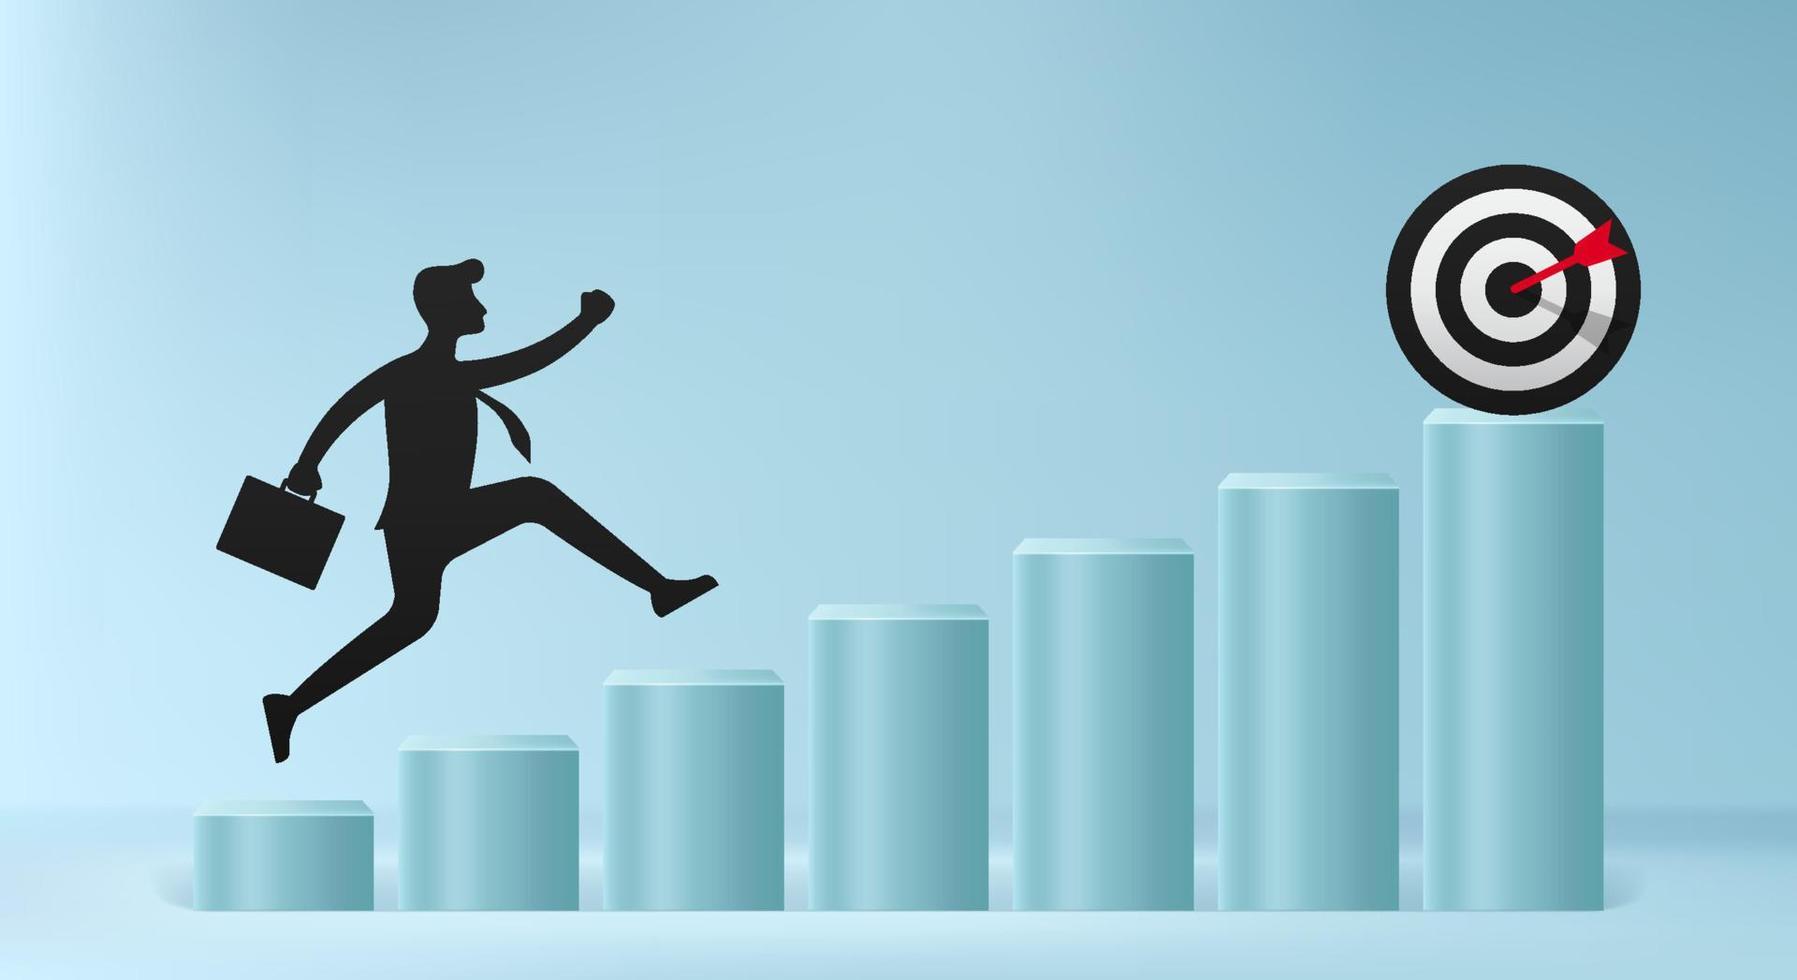 Silhouette of businessman jumps over obstacle to traget, business overcome and success concept vector